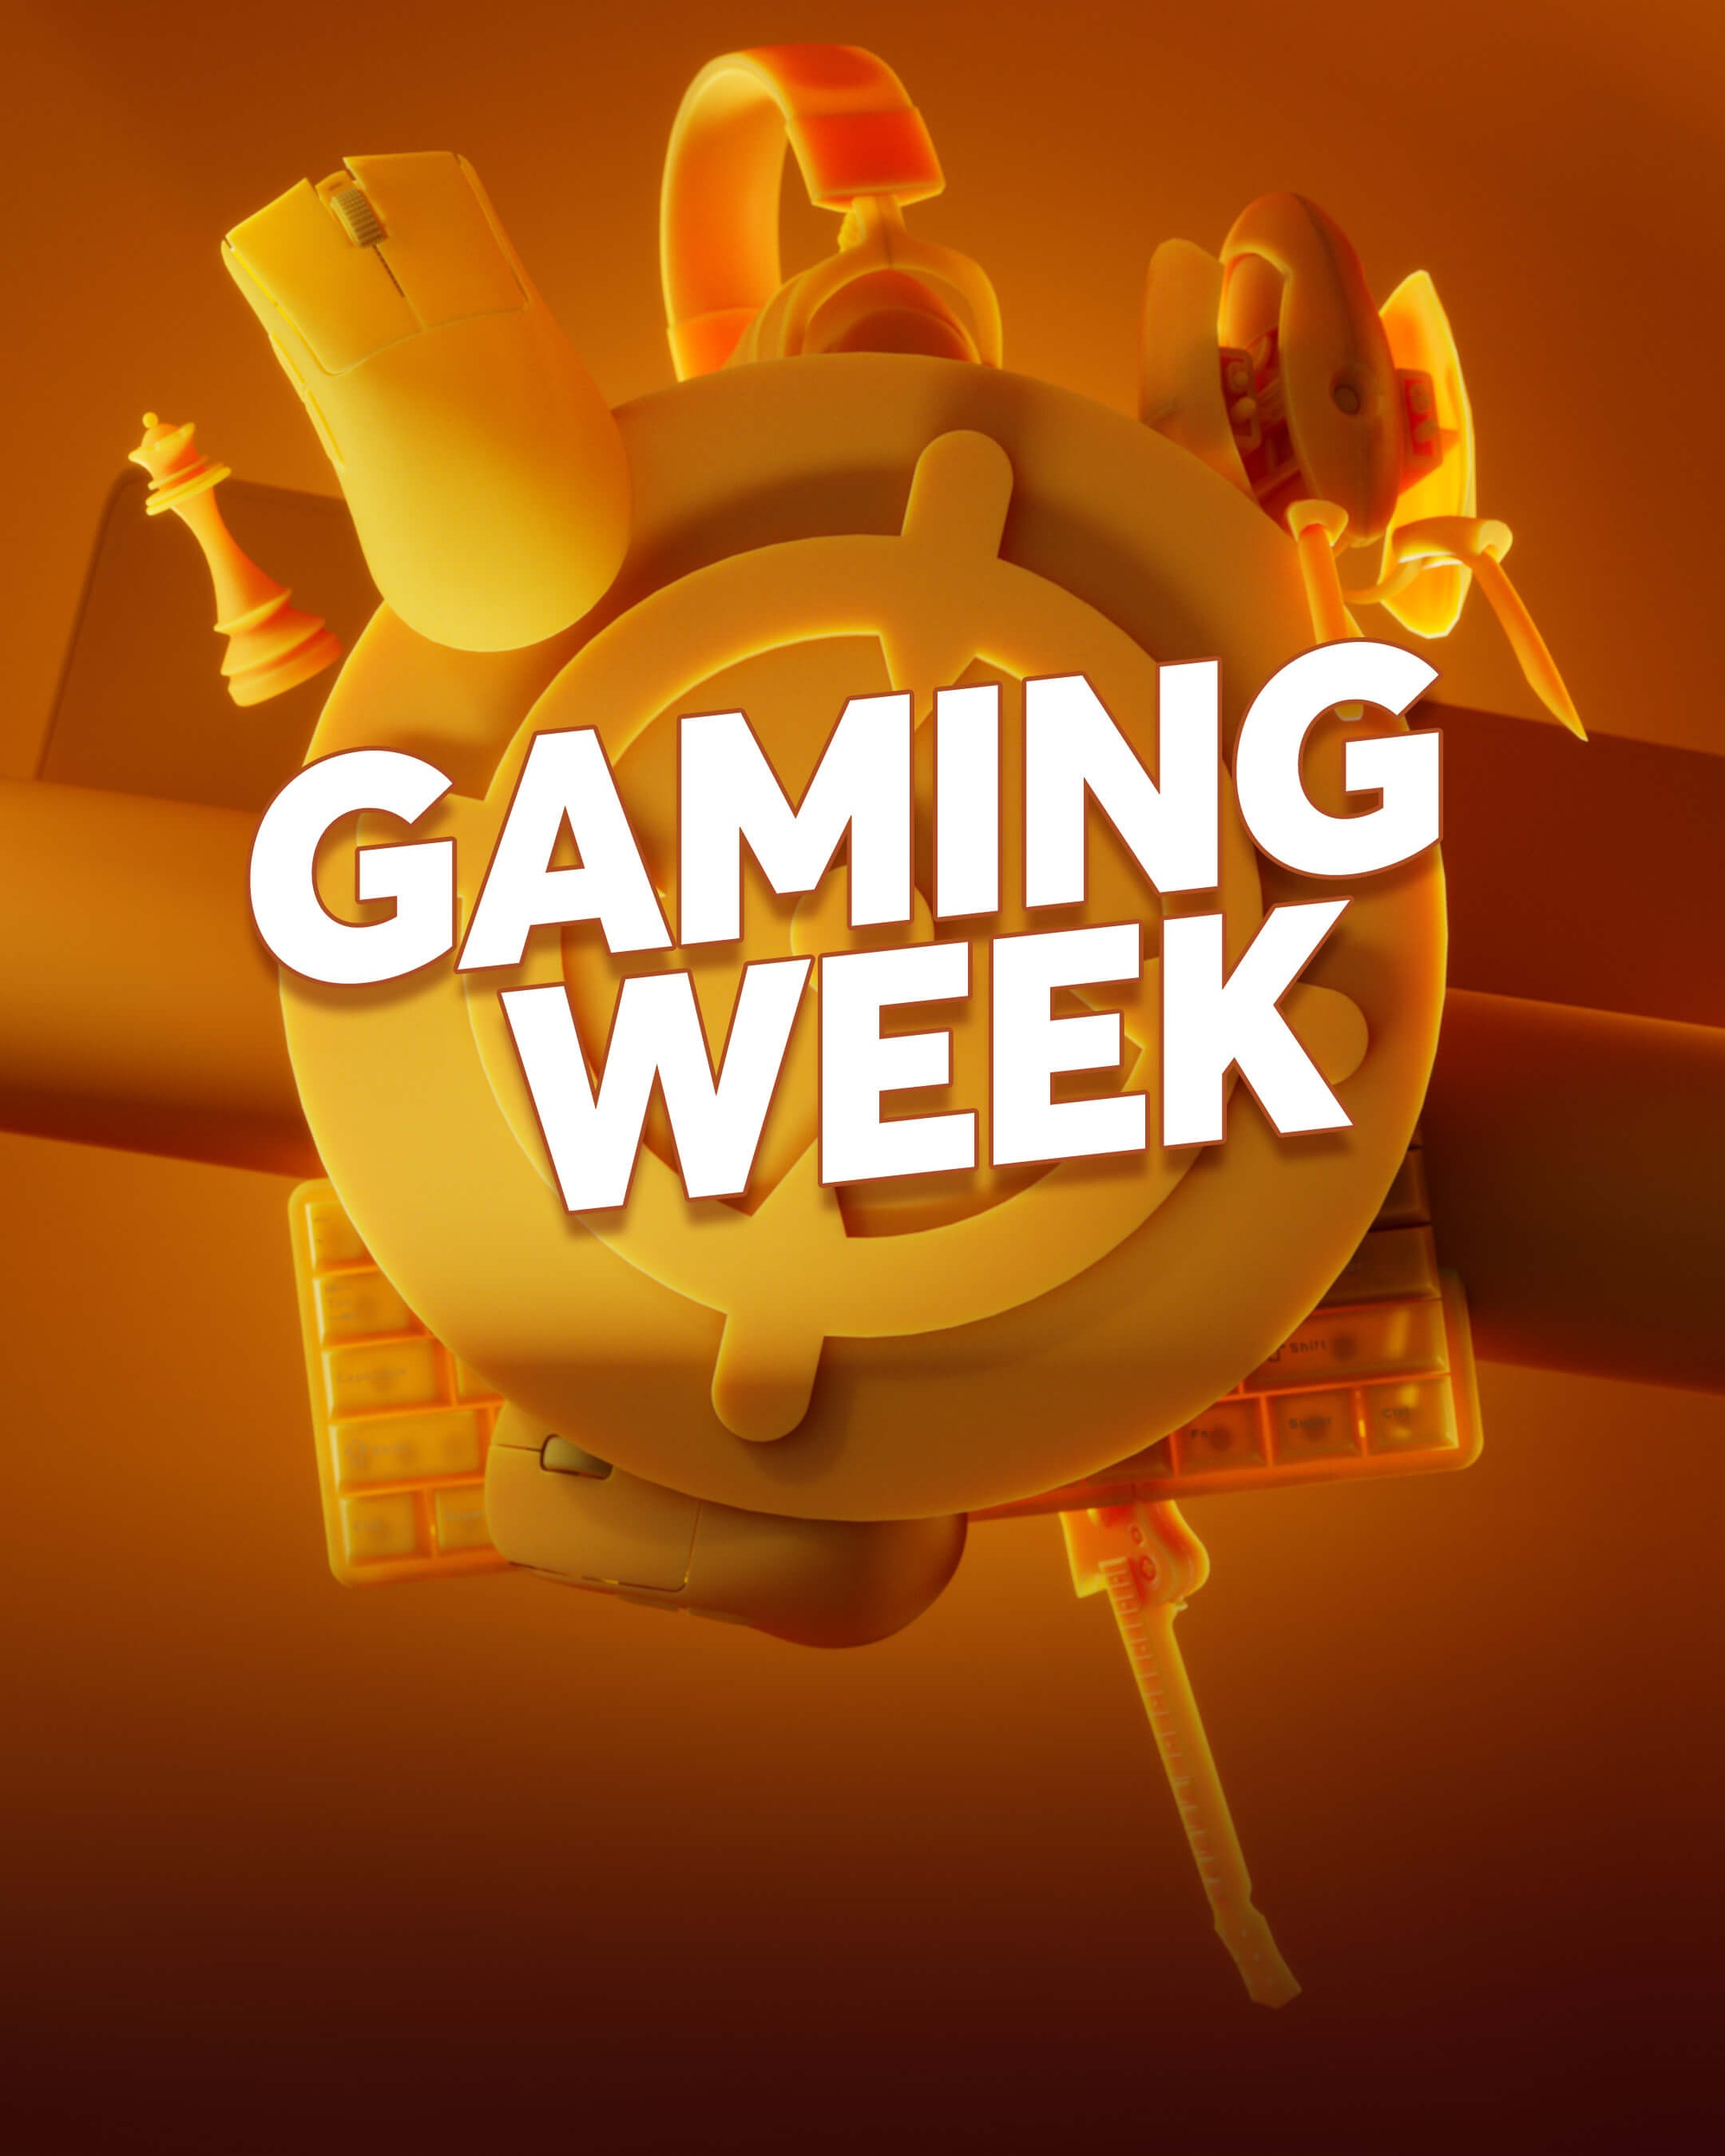 Gaming Week with discounts